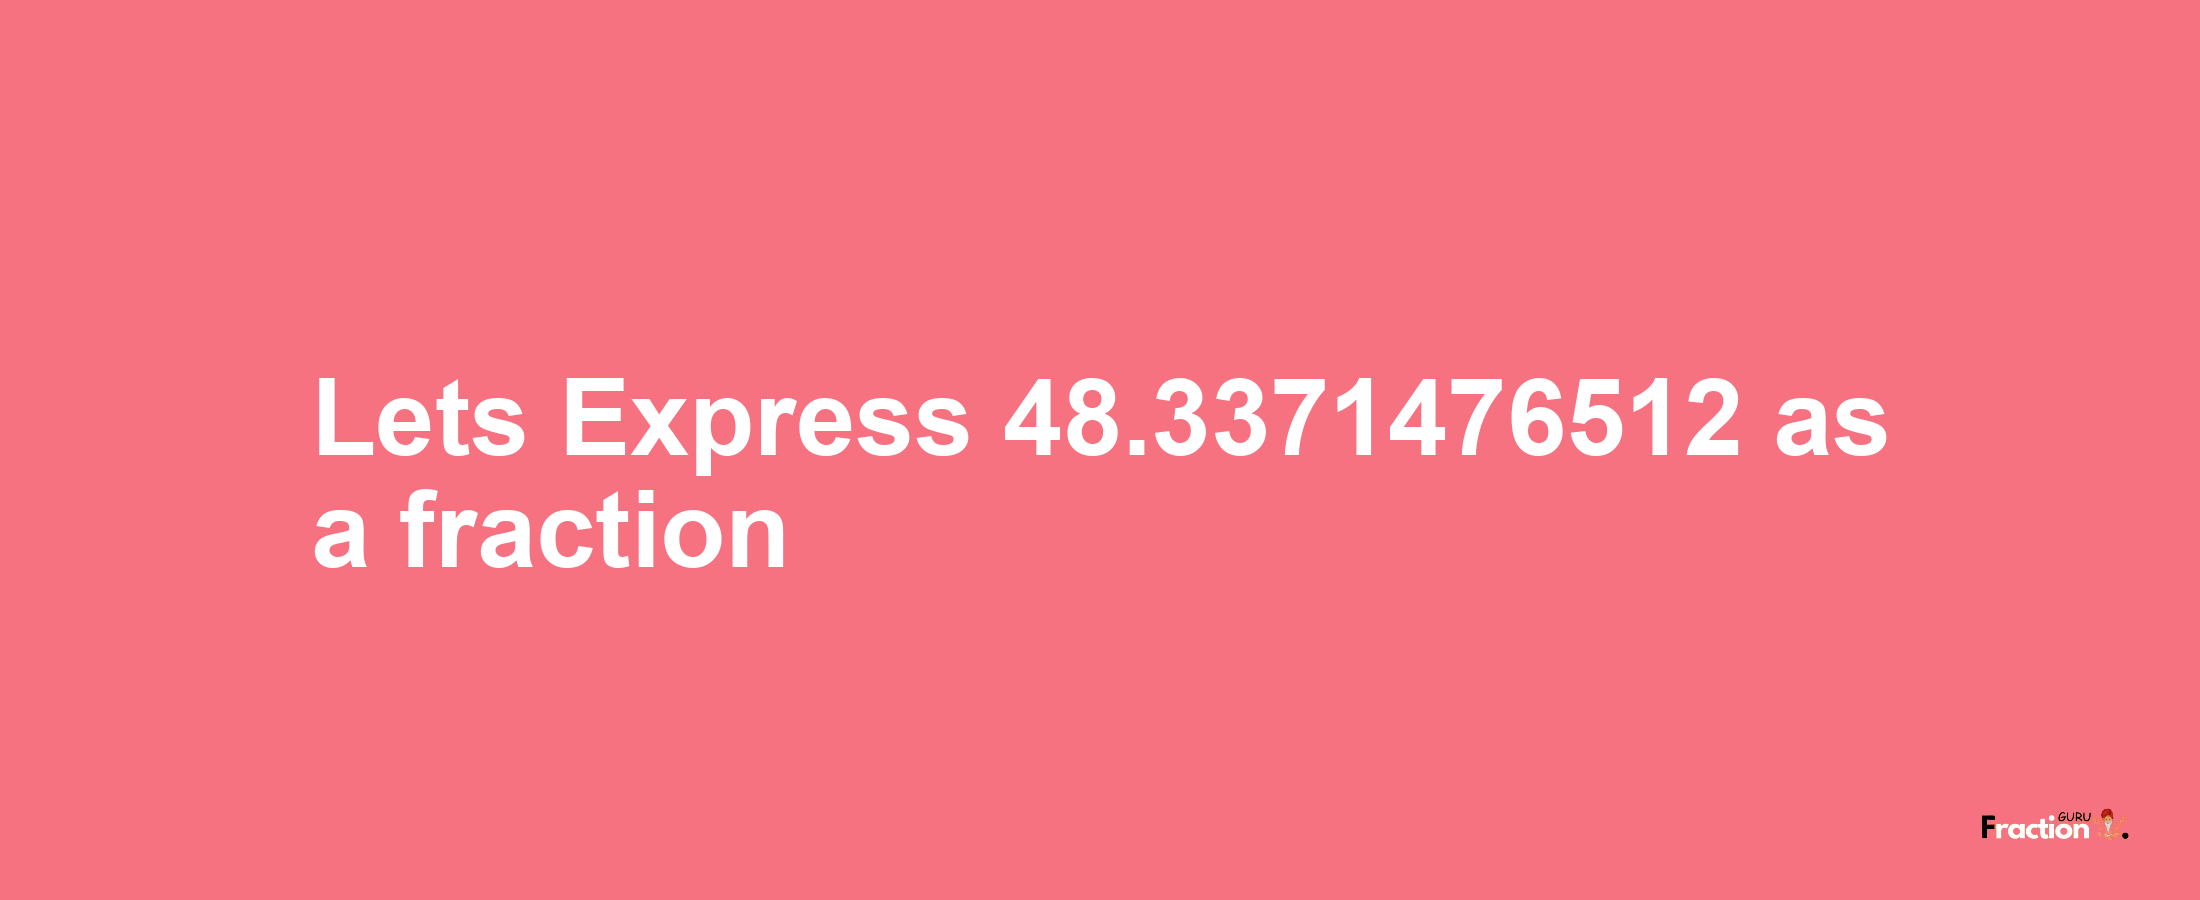 Lets Express 48.3371476512 as afraction